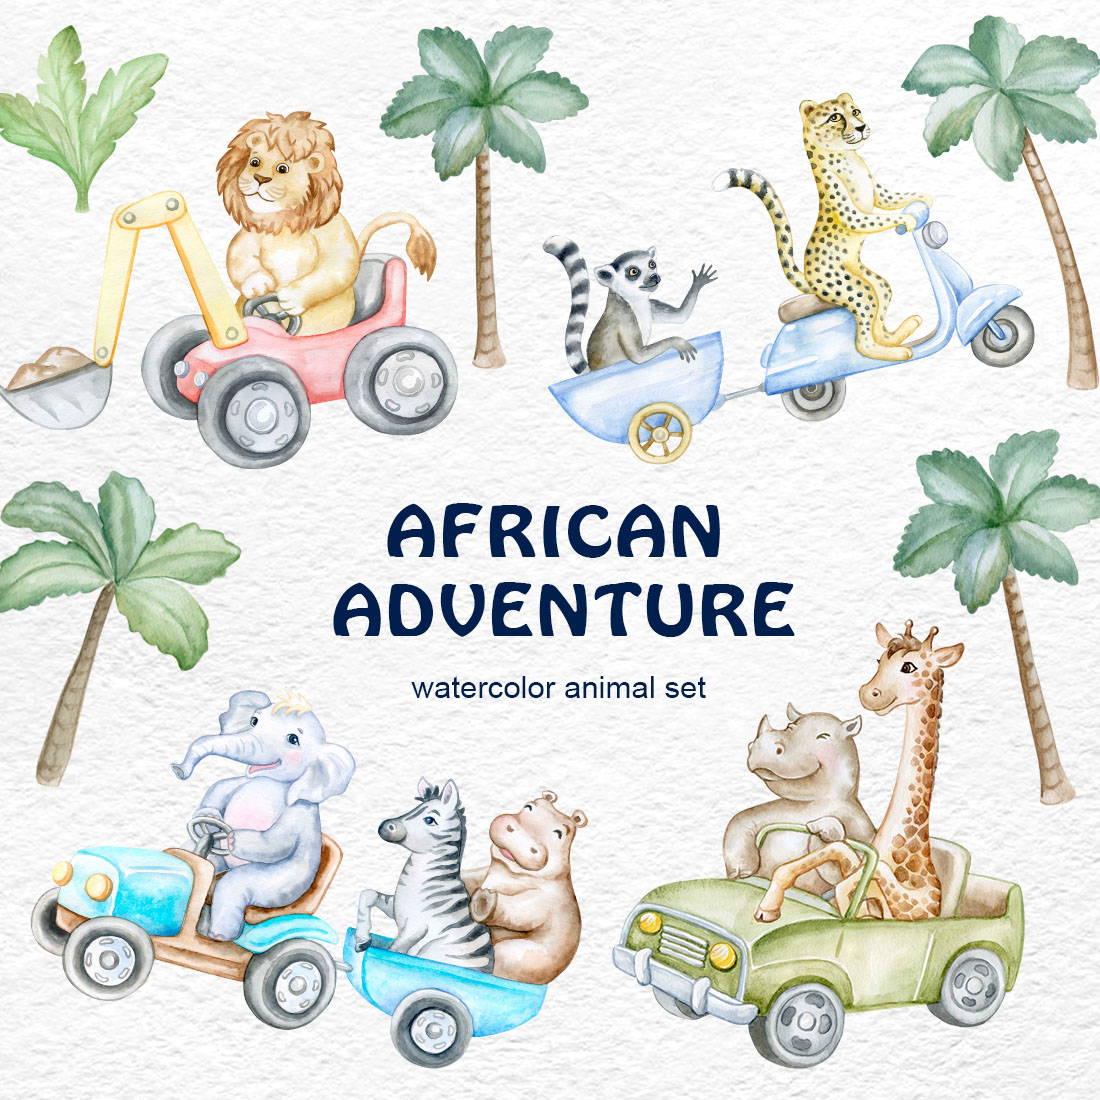 African Adventure Animals cover image.